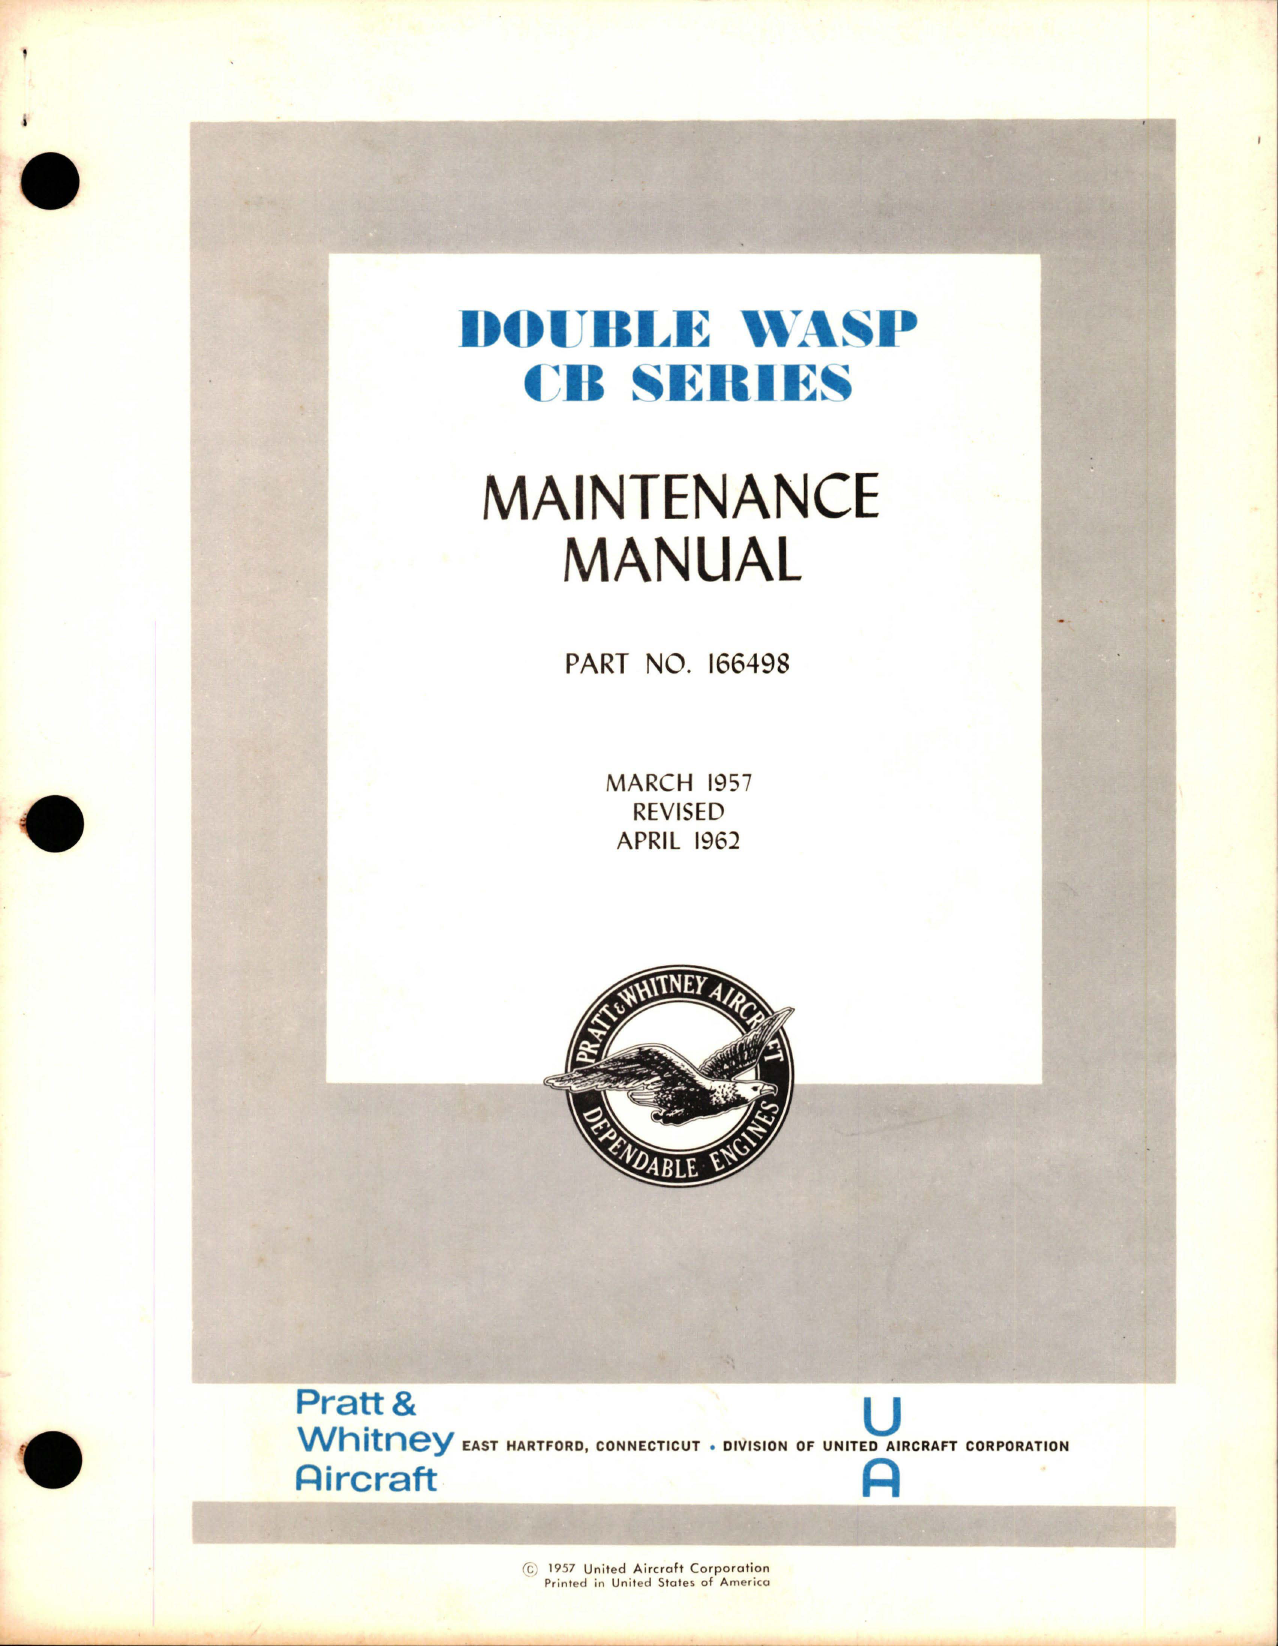 Sample page 1 from AirCorps Library document: Maintenance Manual for Double Wasp CB Series - Part 166498 